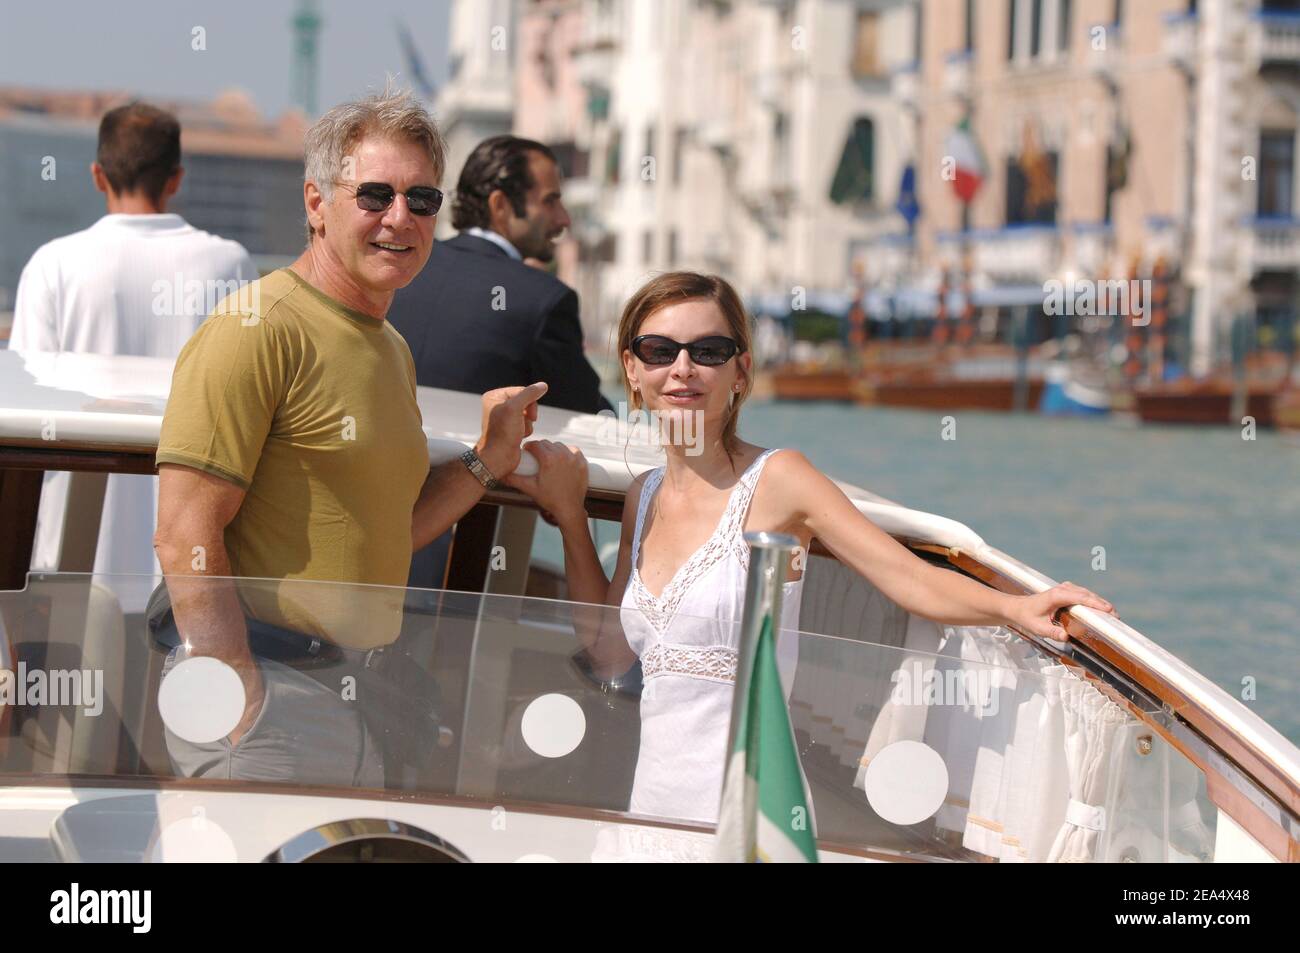 Harrison Ford and his girlfriend Calista Flockhart have fun on a Taxi Boat during the 62nd Venice Film Festival in Venice, Italy, on September 1, 2005. Photo by Lionel Hahn/ABACAPRESS.COM. Stock Photo